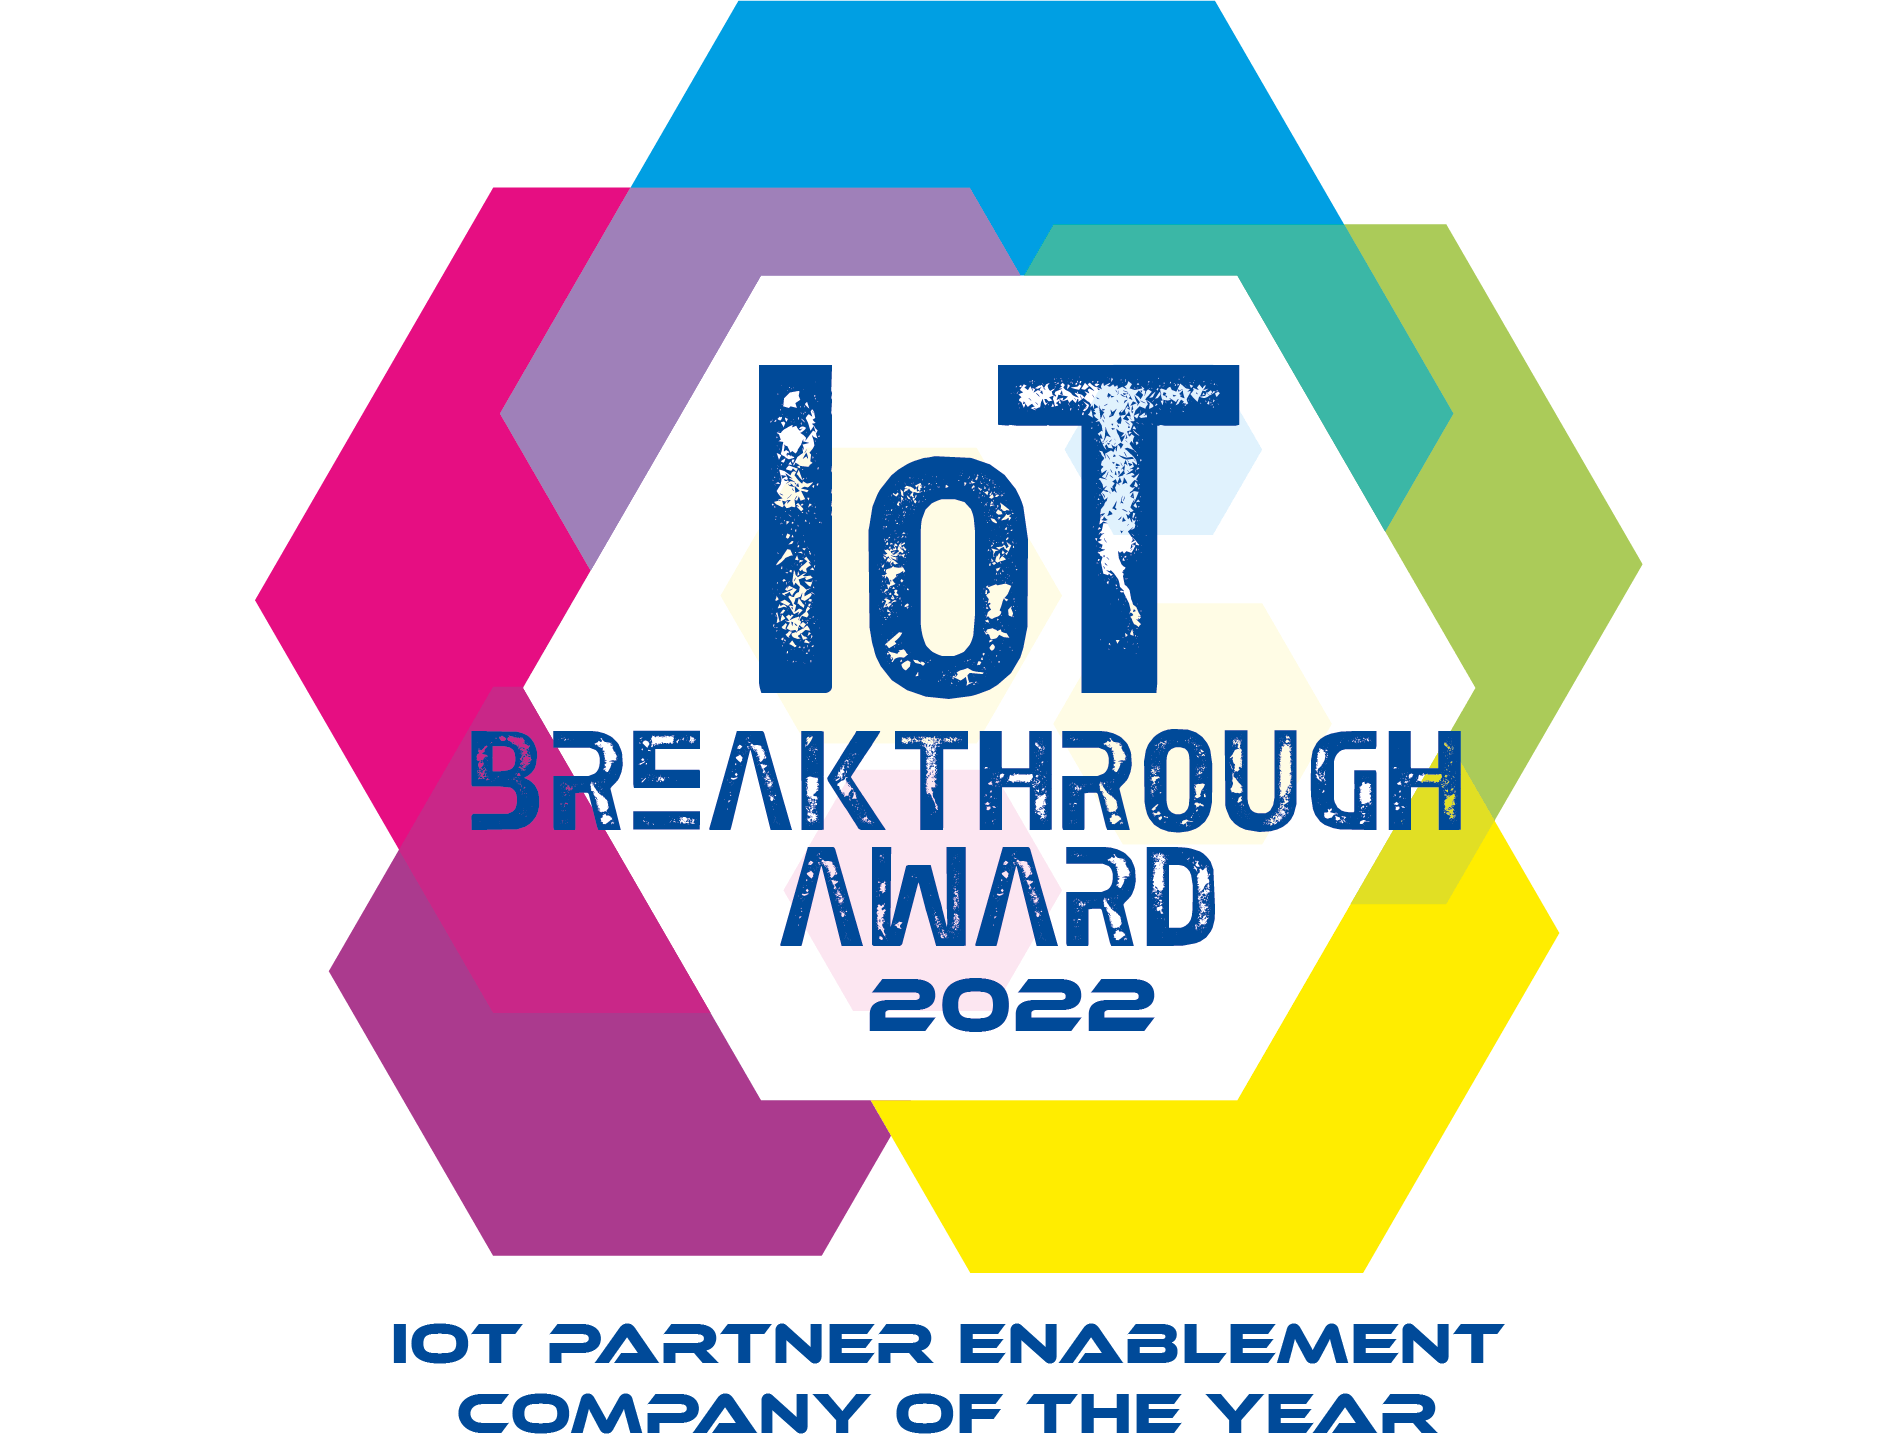 SpinDance Named “IoT Partner Enablement Company of the Year” in 2022 IoT Breakthrough Awards Program